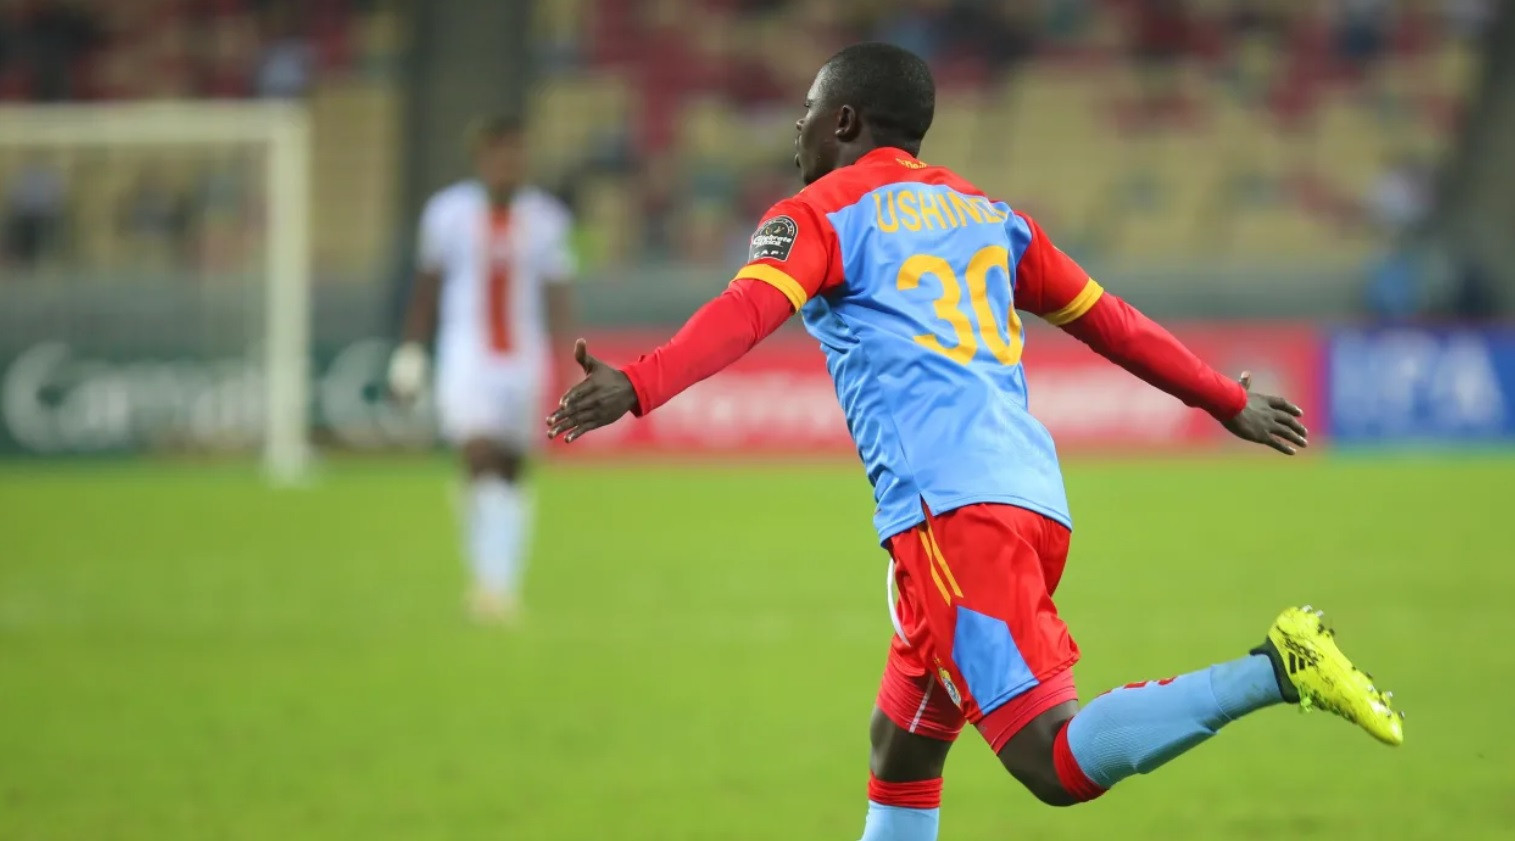 DR Congo defeat neighbours Congo as Group B begins at African Nations Championship